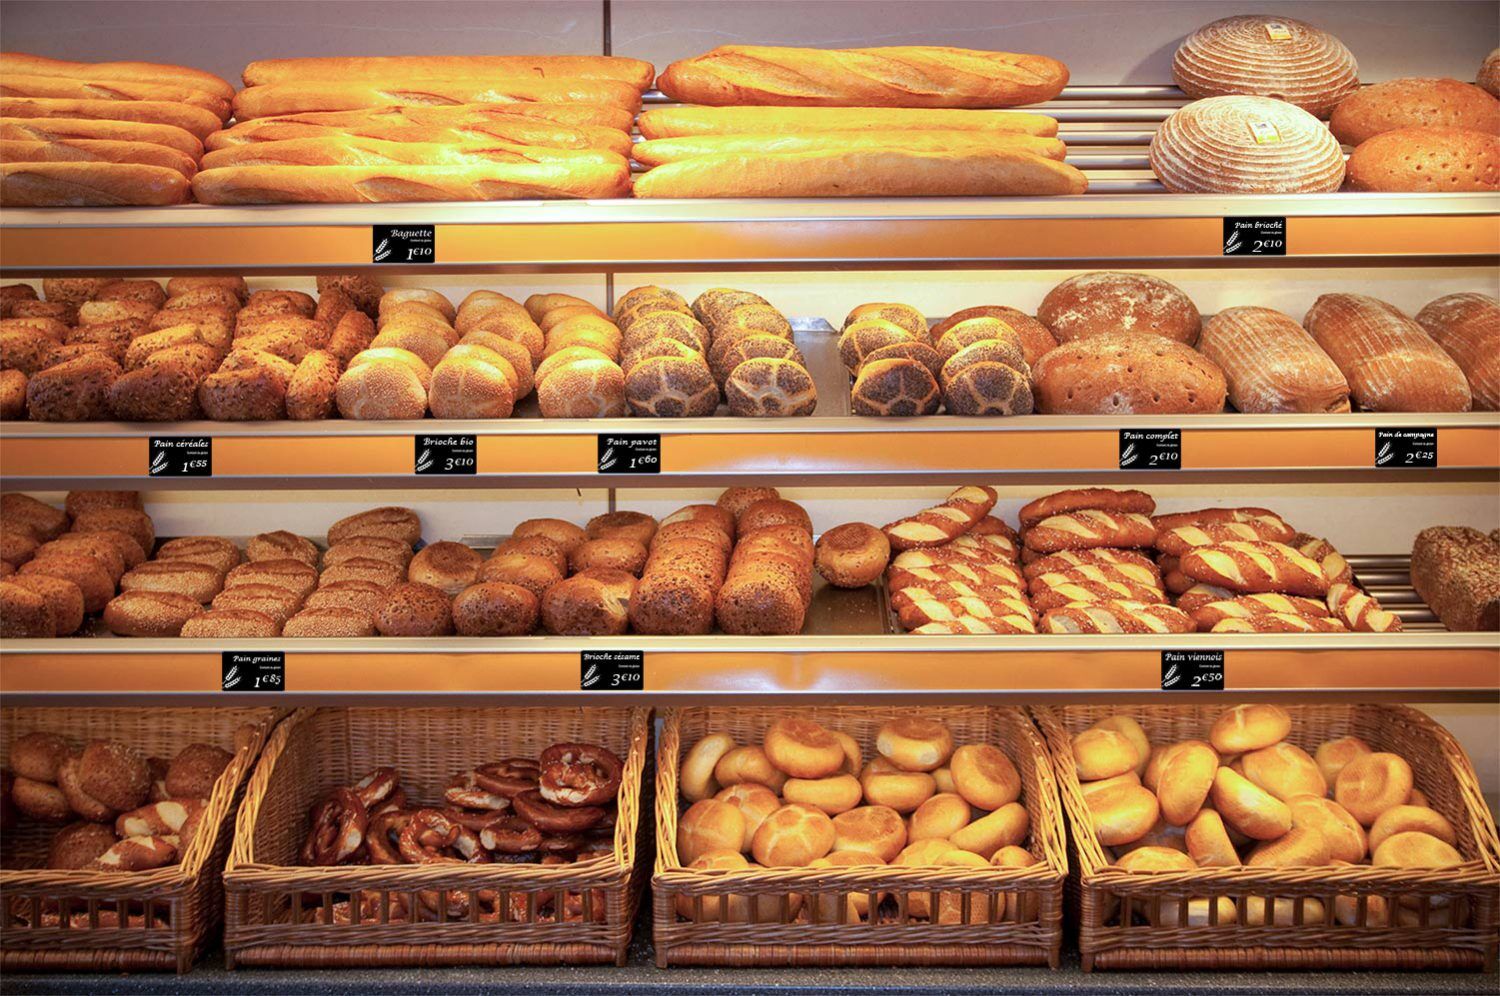 Bakery Bread Price Tags designed and created by Edikio price tag solution